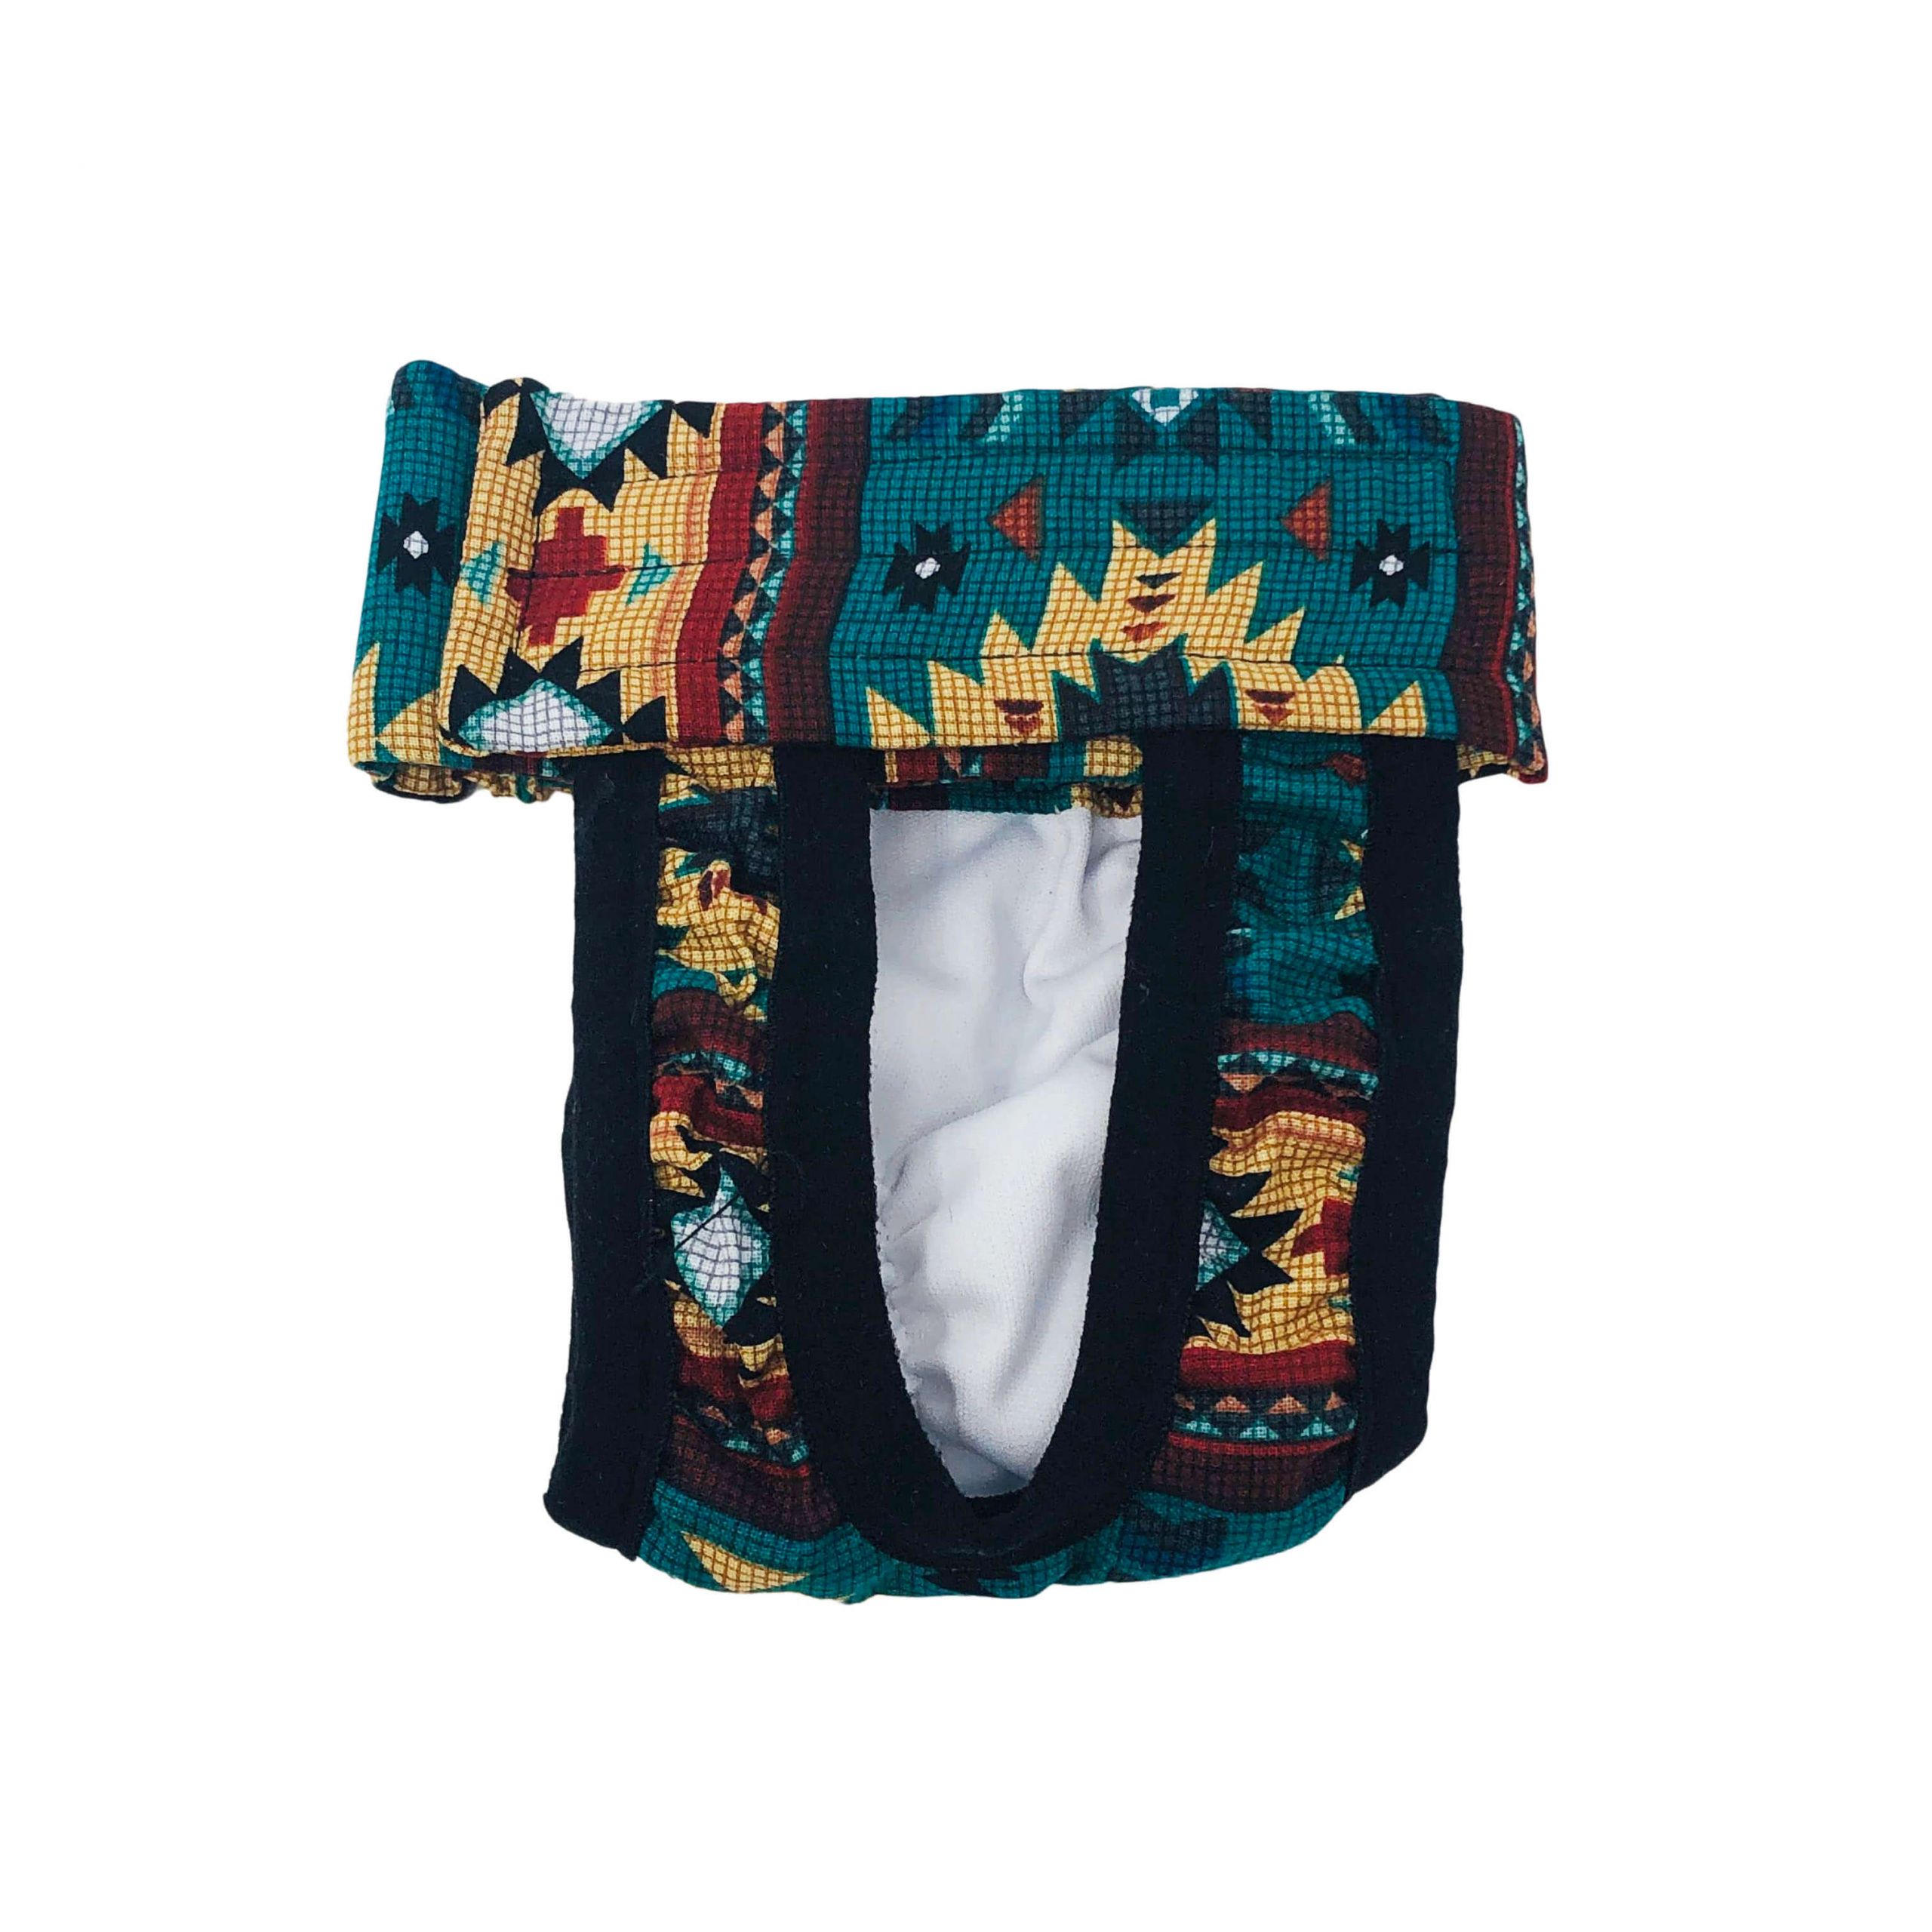 American Southwest Pattern on Blue Teal  Cat Diaper Pull-up